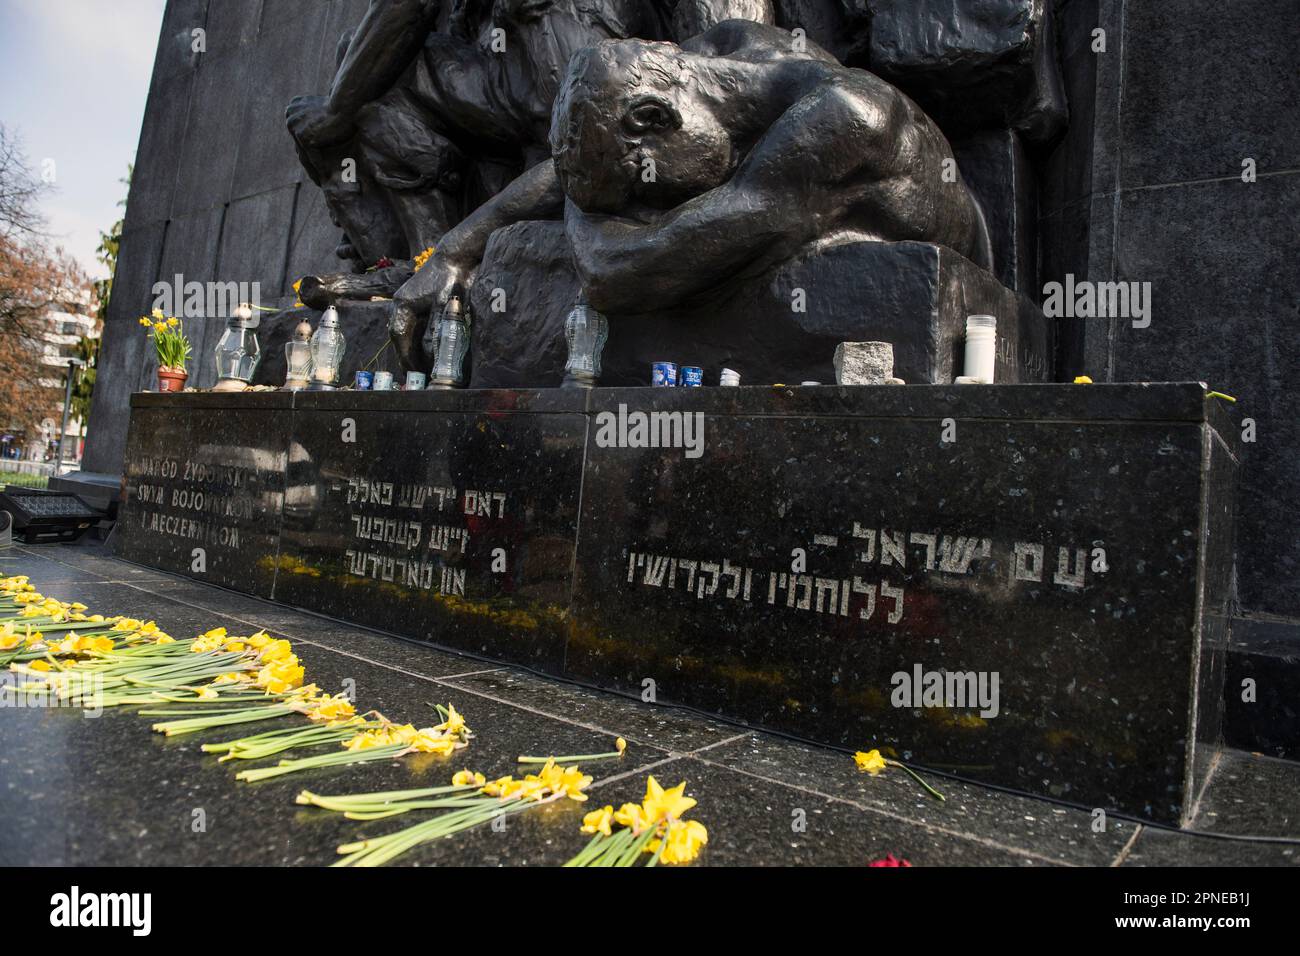 Warsaw, Mazowieckie, Poland. 18th Apr, 2023. The Monument to the Ghetto Heroes commemorates Jewish insurgents from the Warsaw Ghetto, which lasted from 19 April 1943 to 16 May 1943. This year April 19, the world will mark the 80th anniversary of the Warsaw Ghetto Uprising ''“ the first large-scale metropolitan uprising in Nazi-occupied Europe. The Uprising became an everlasting symbol of the resistance of Polish Jews against the Holocaust. Between 1942 to 1943 Germans transported over 300,000 Jews from the Warsaw Ghetto to the death camp in Treblinka and other camps.A day before the official Stock Photo